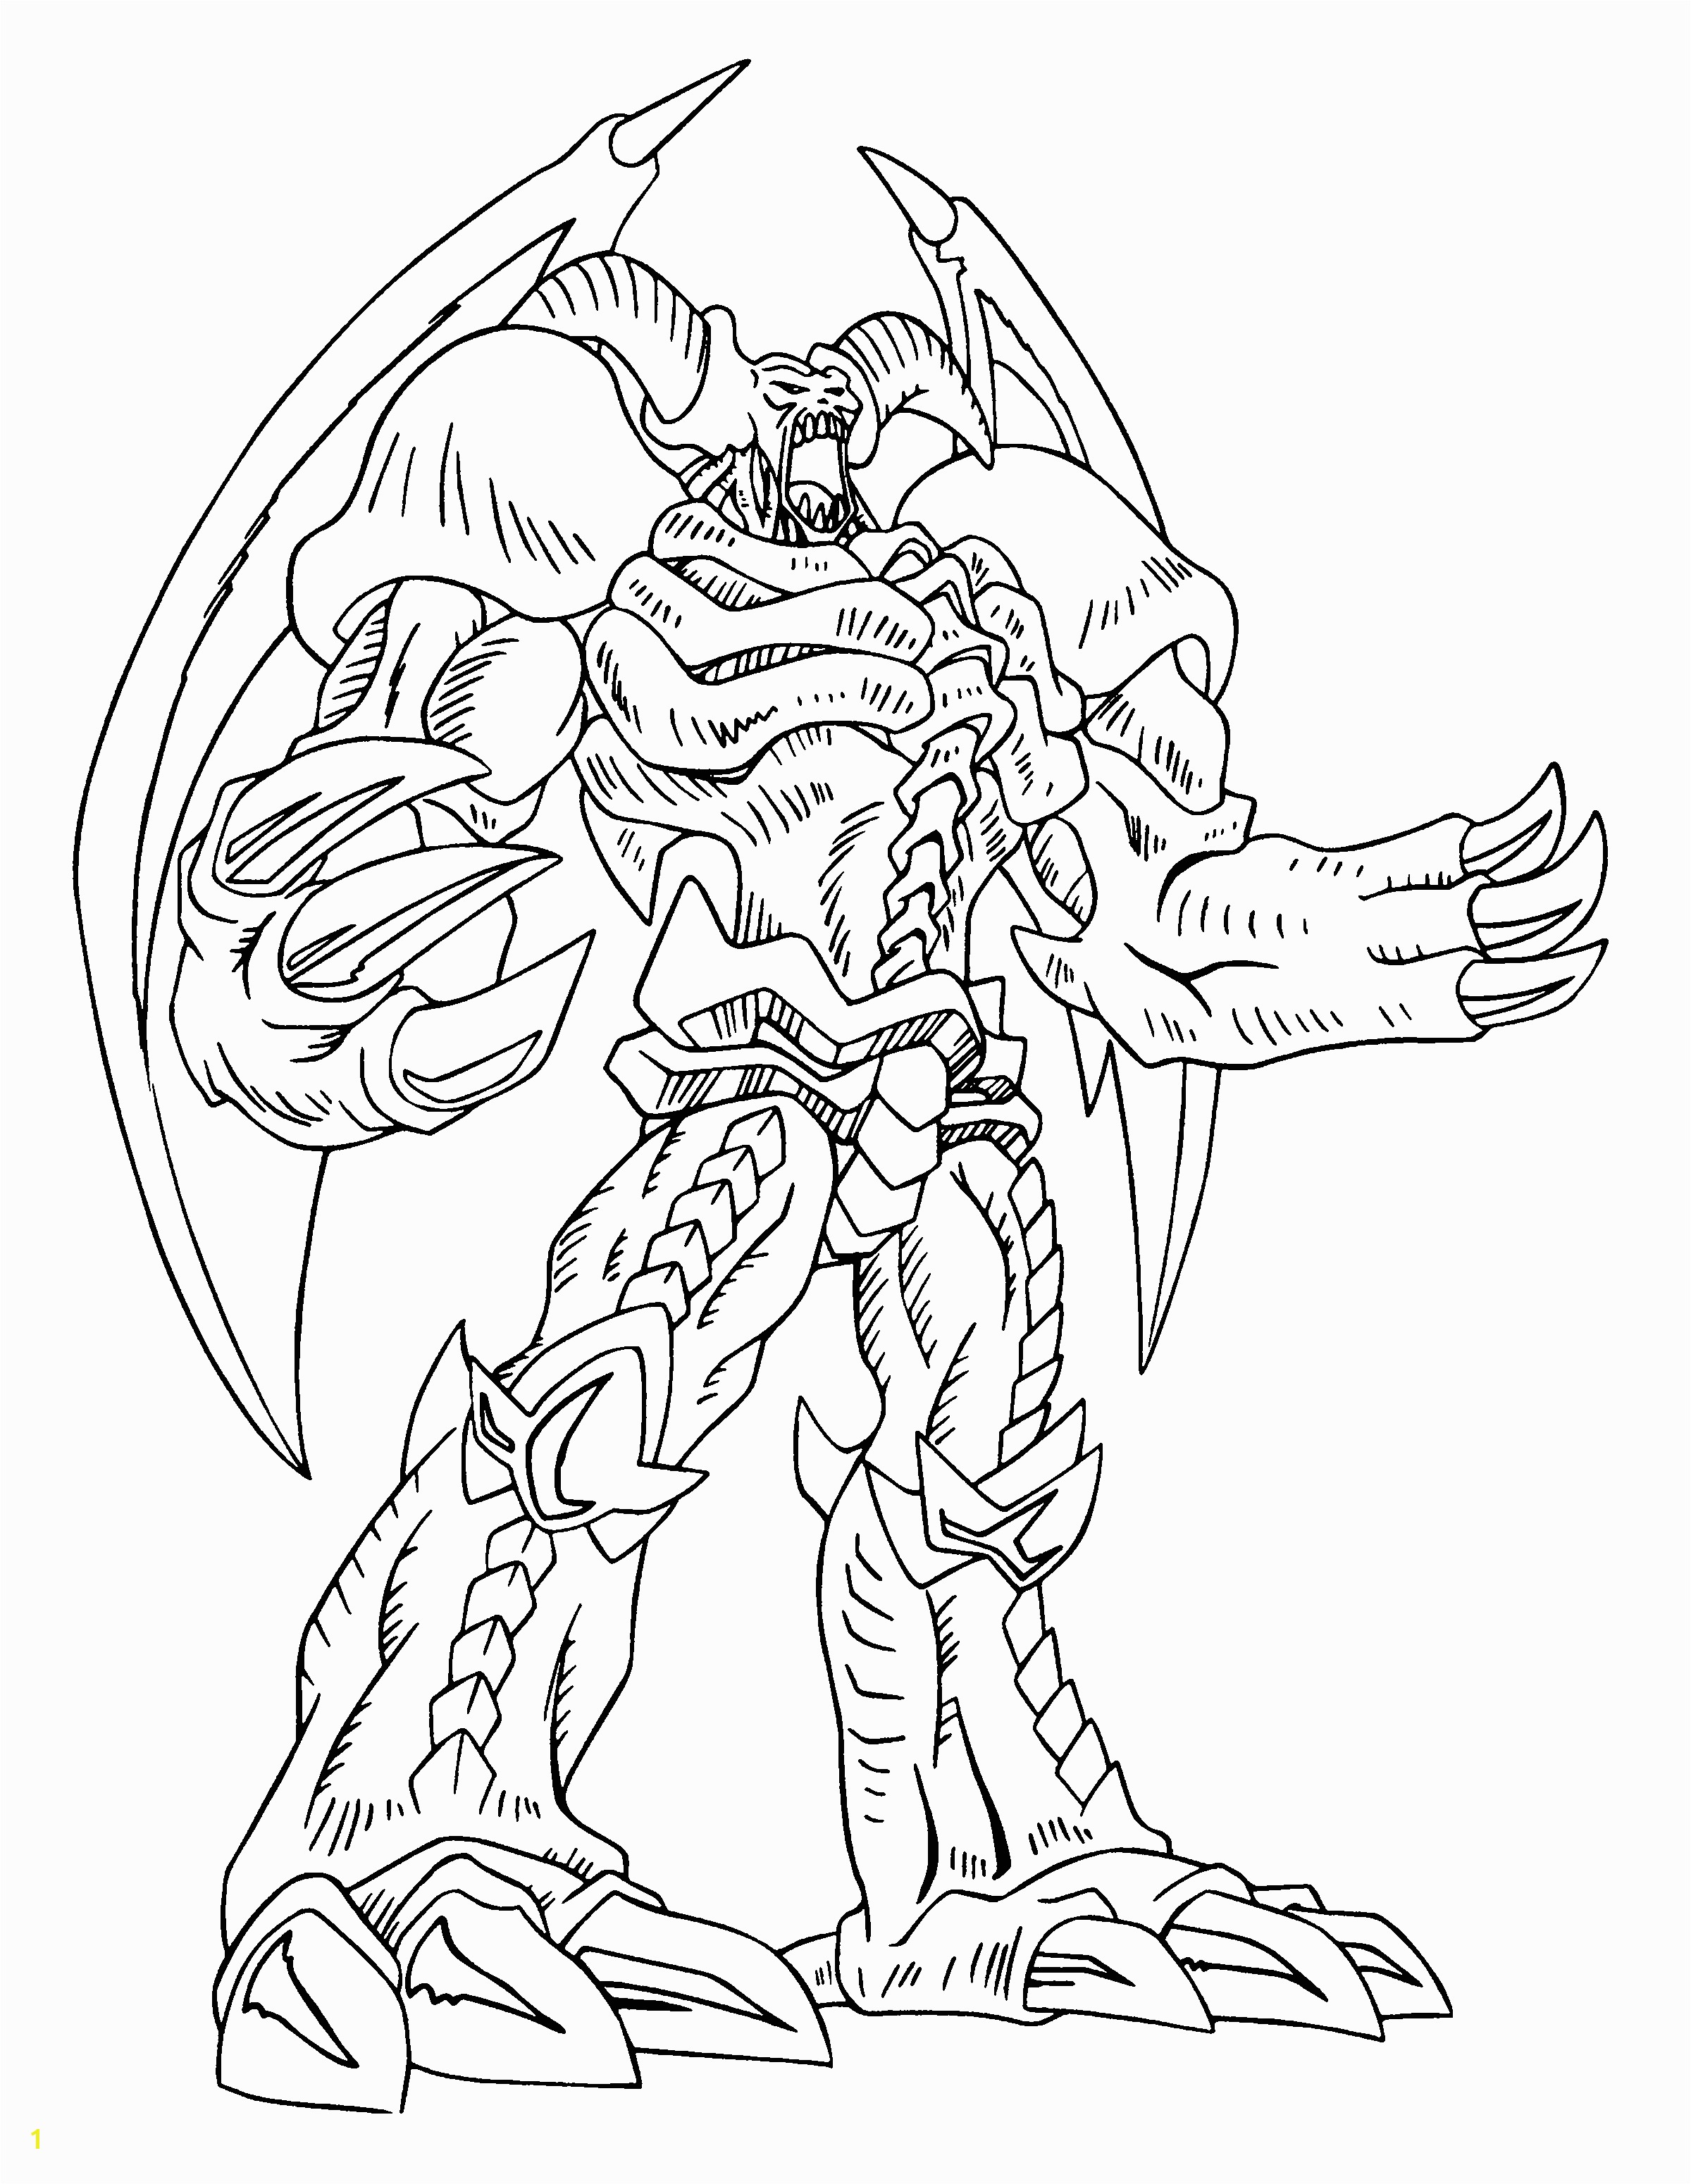 Yu Gi Oh Coloring Page Tv Series Coloring Page PicGifs